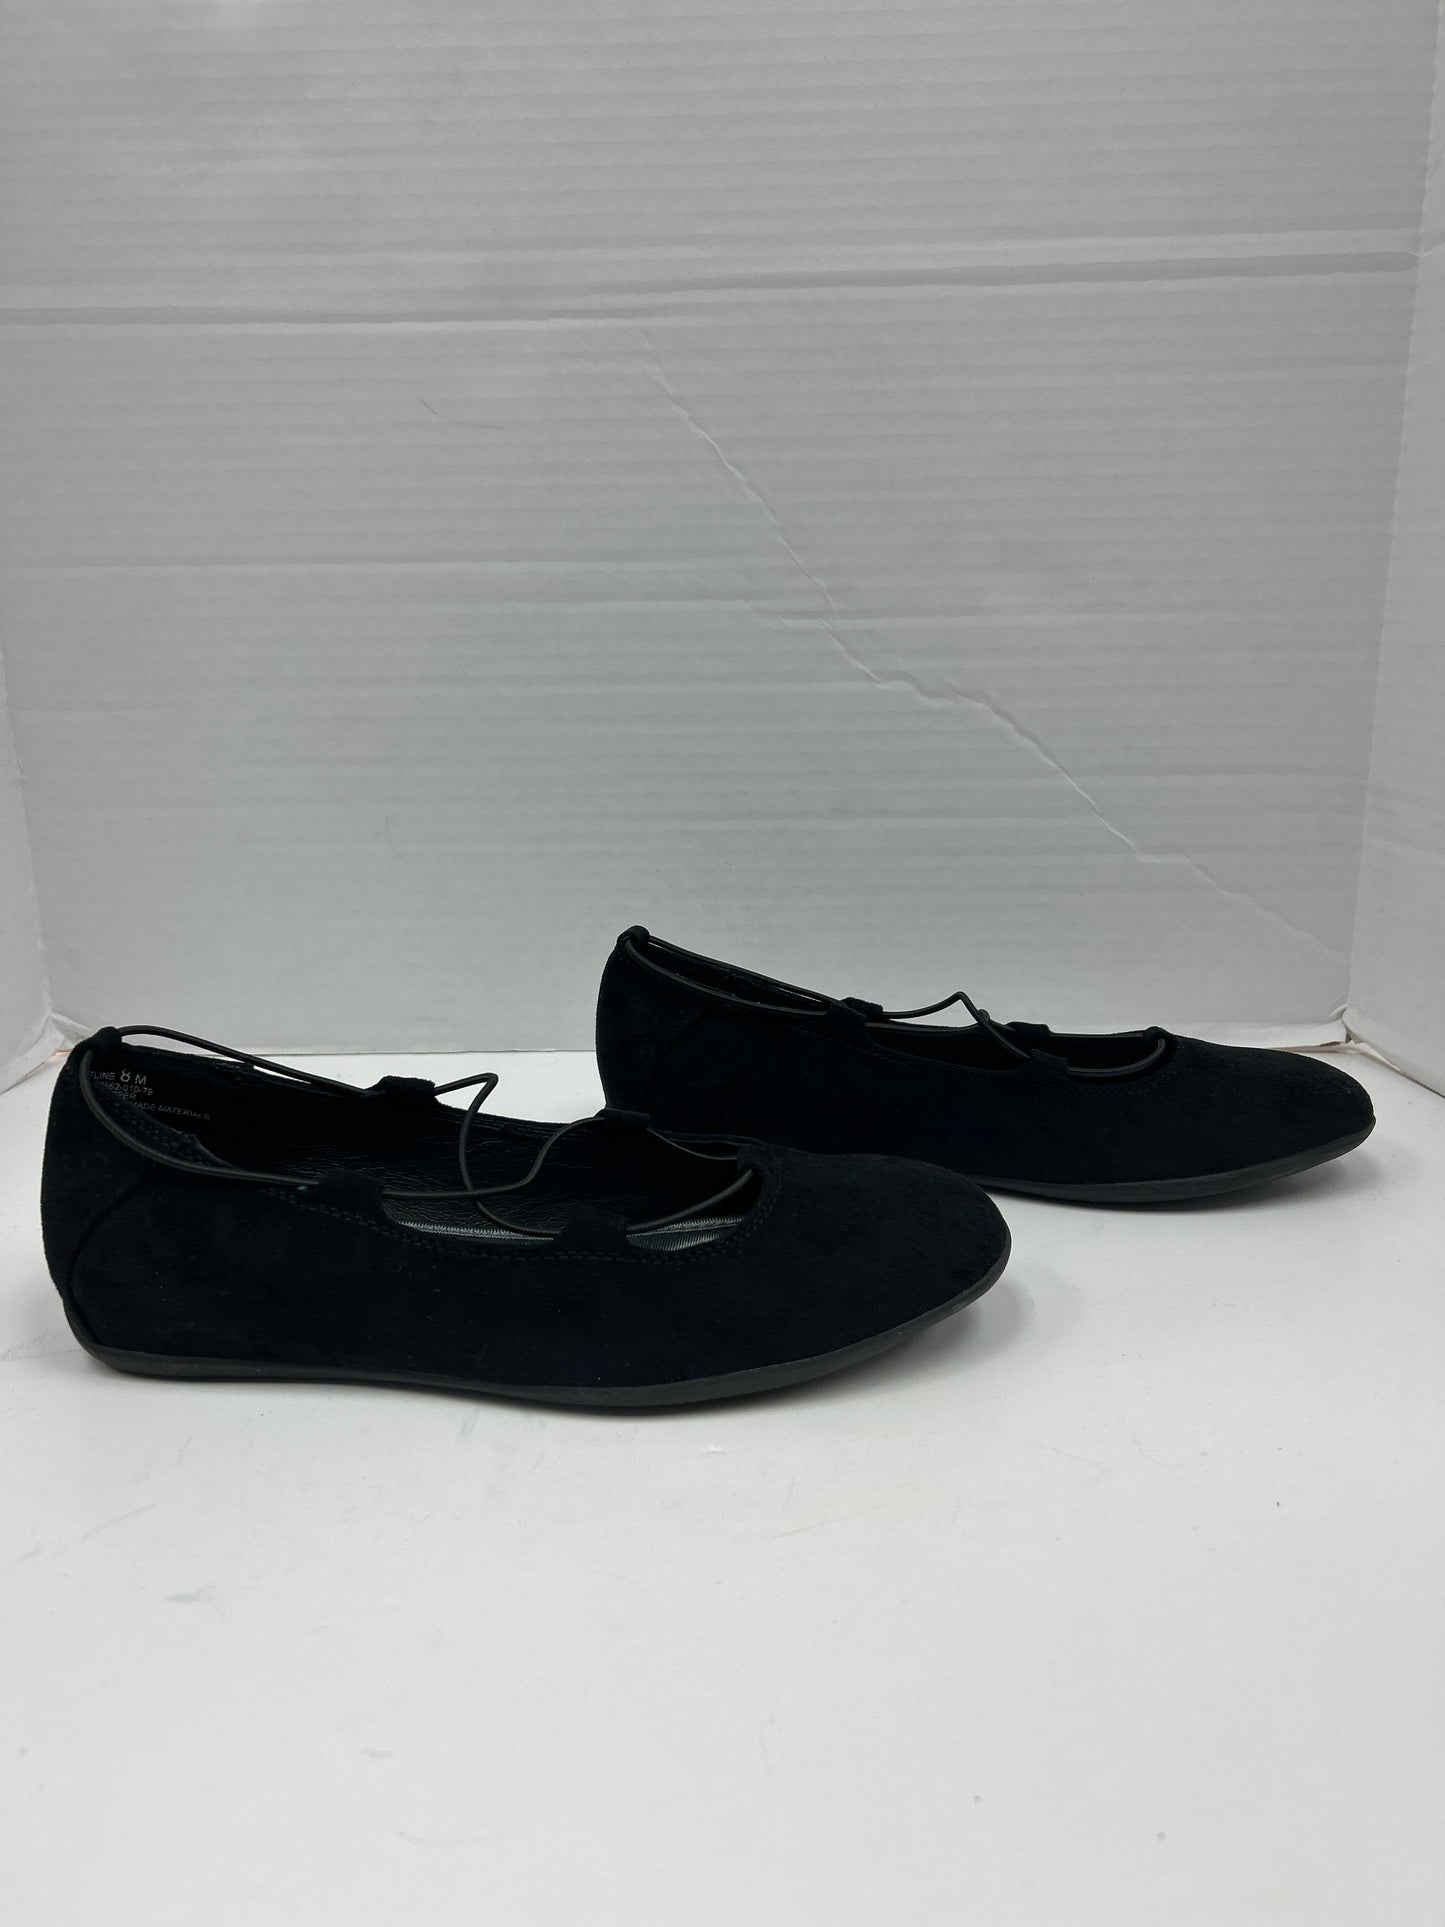 Shoes Flats By Bare Traps  Size: 8